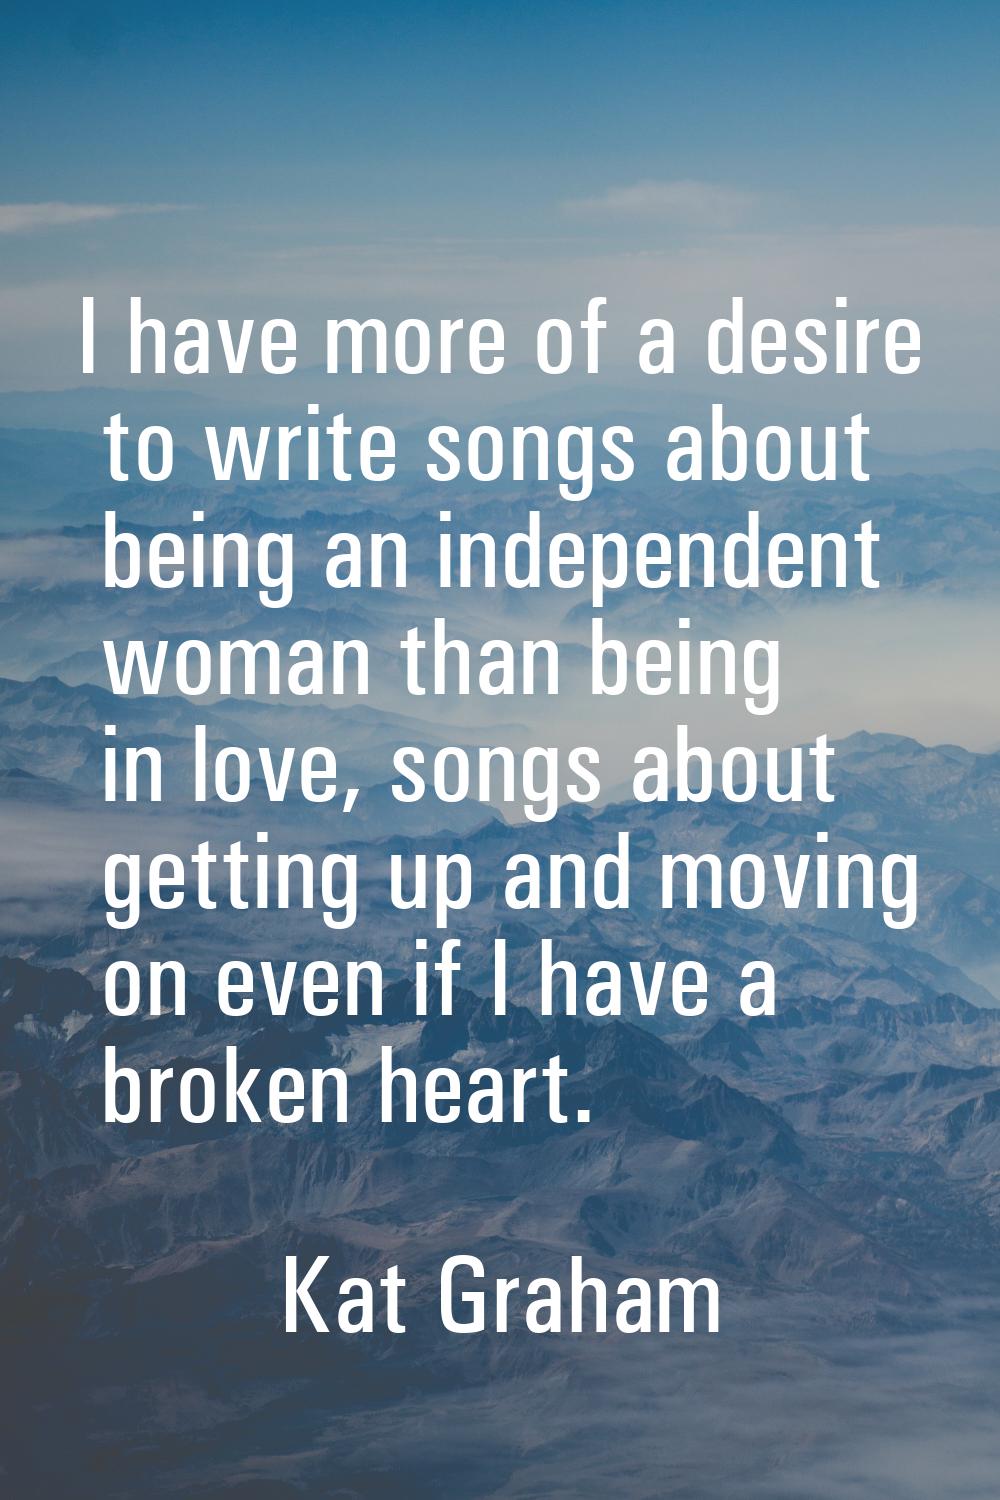 I have more of a desire to write songs about being an independent woman than being in love, songs a